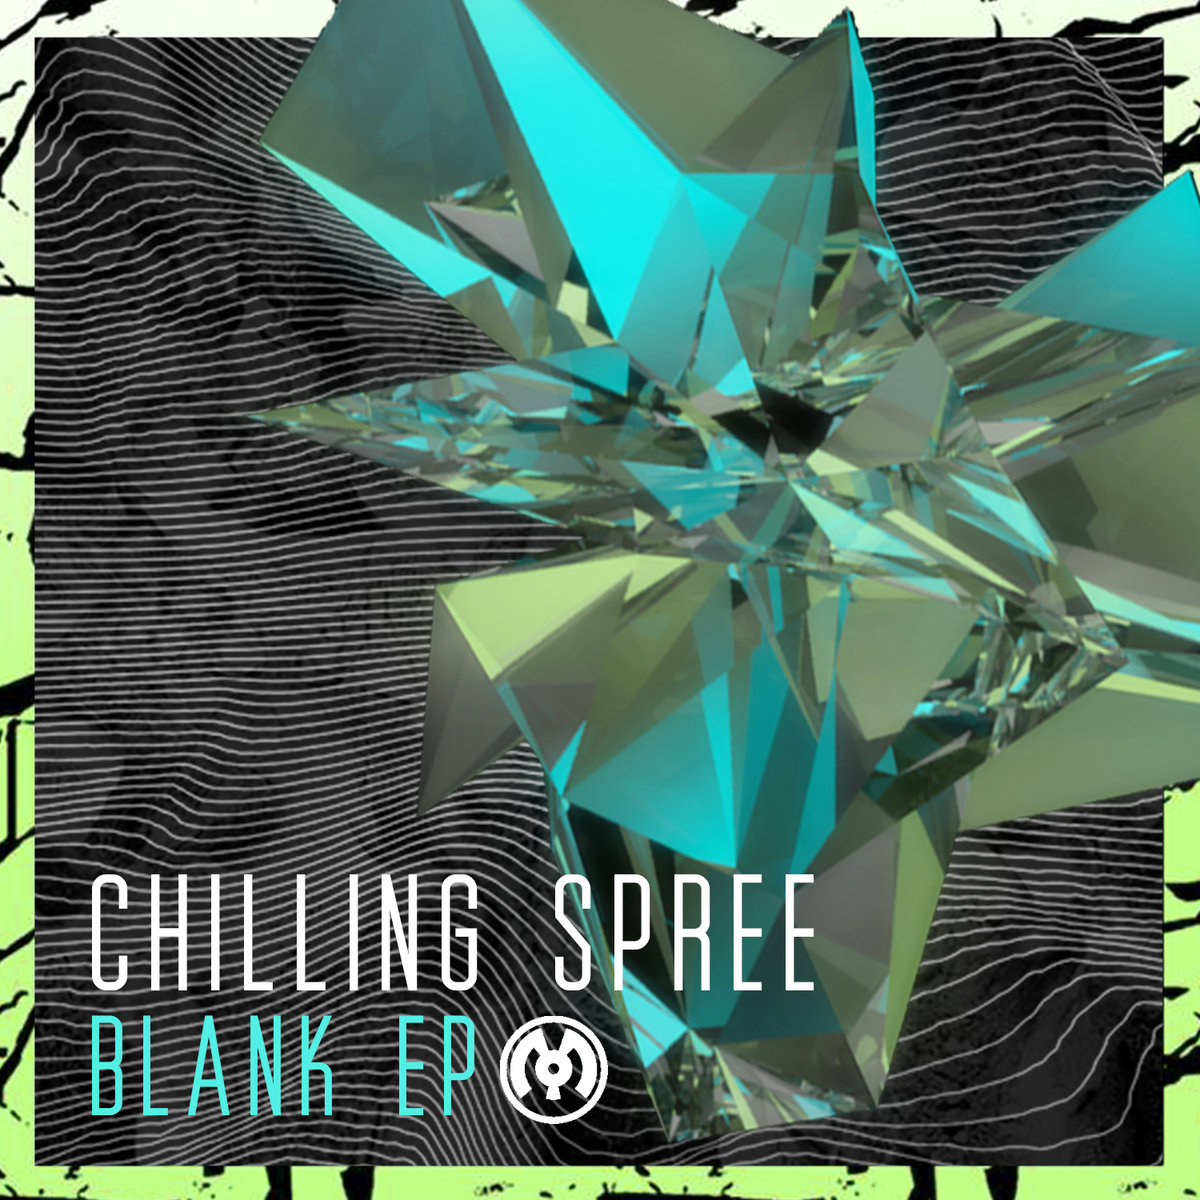 Chilling Spree - The Blank EP @ 'The Blank EP' album (electronic, dubstep)